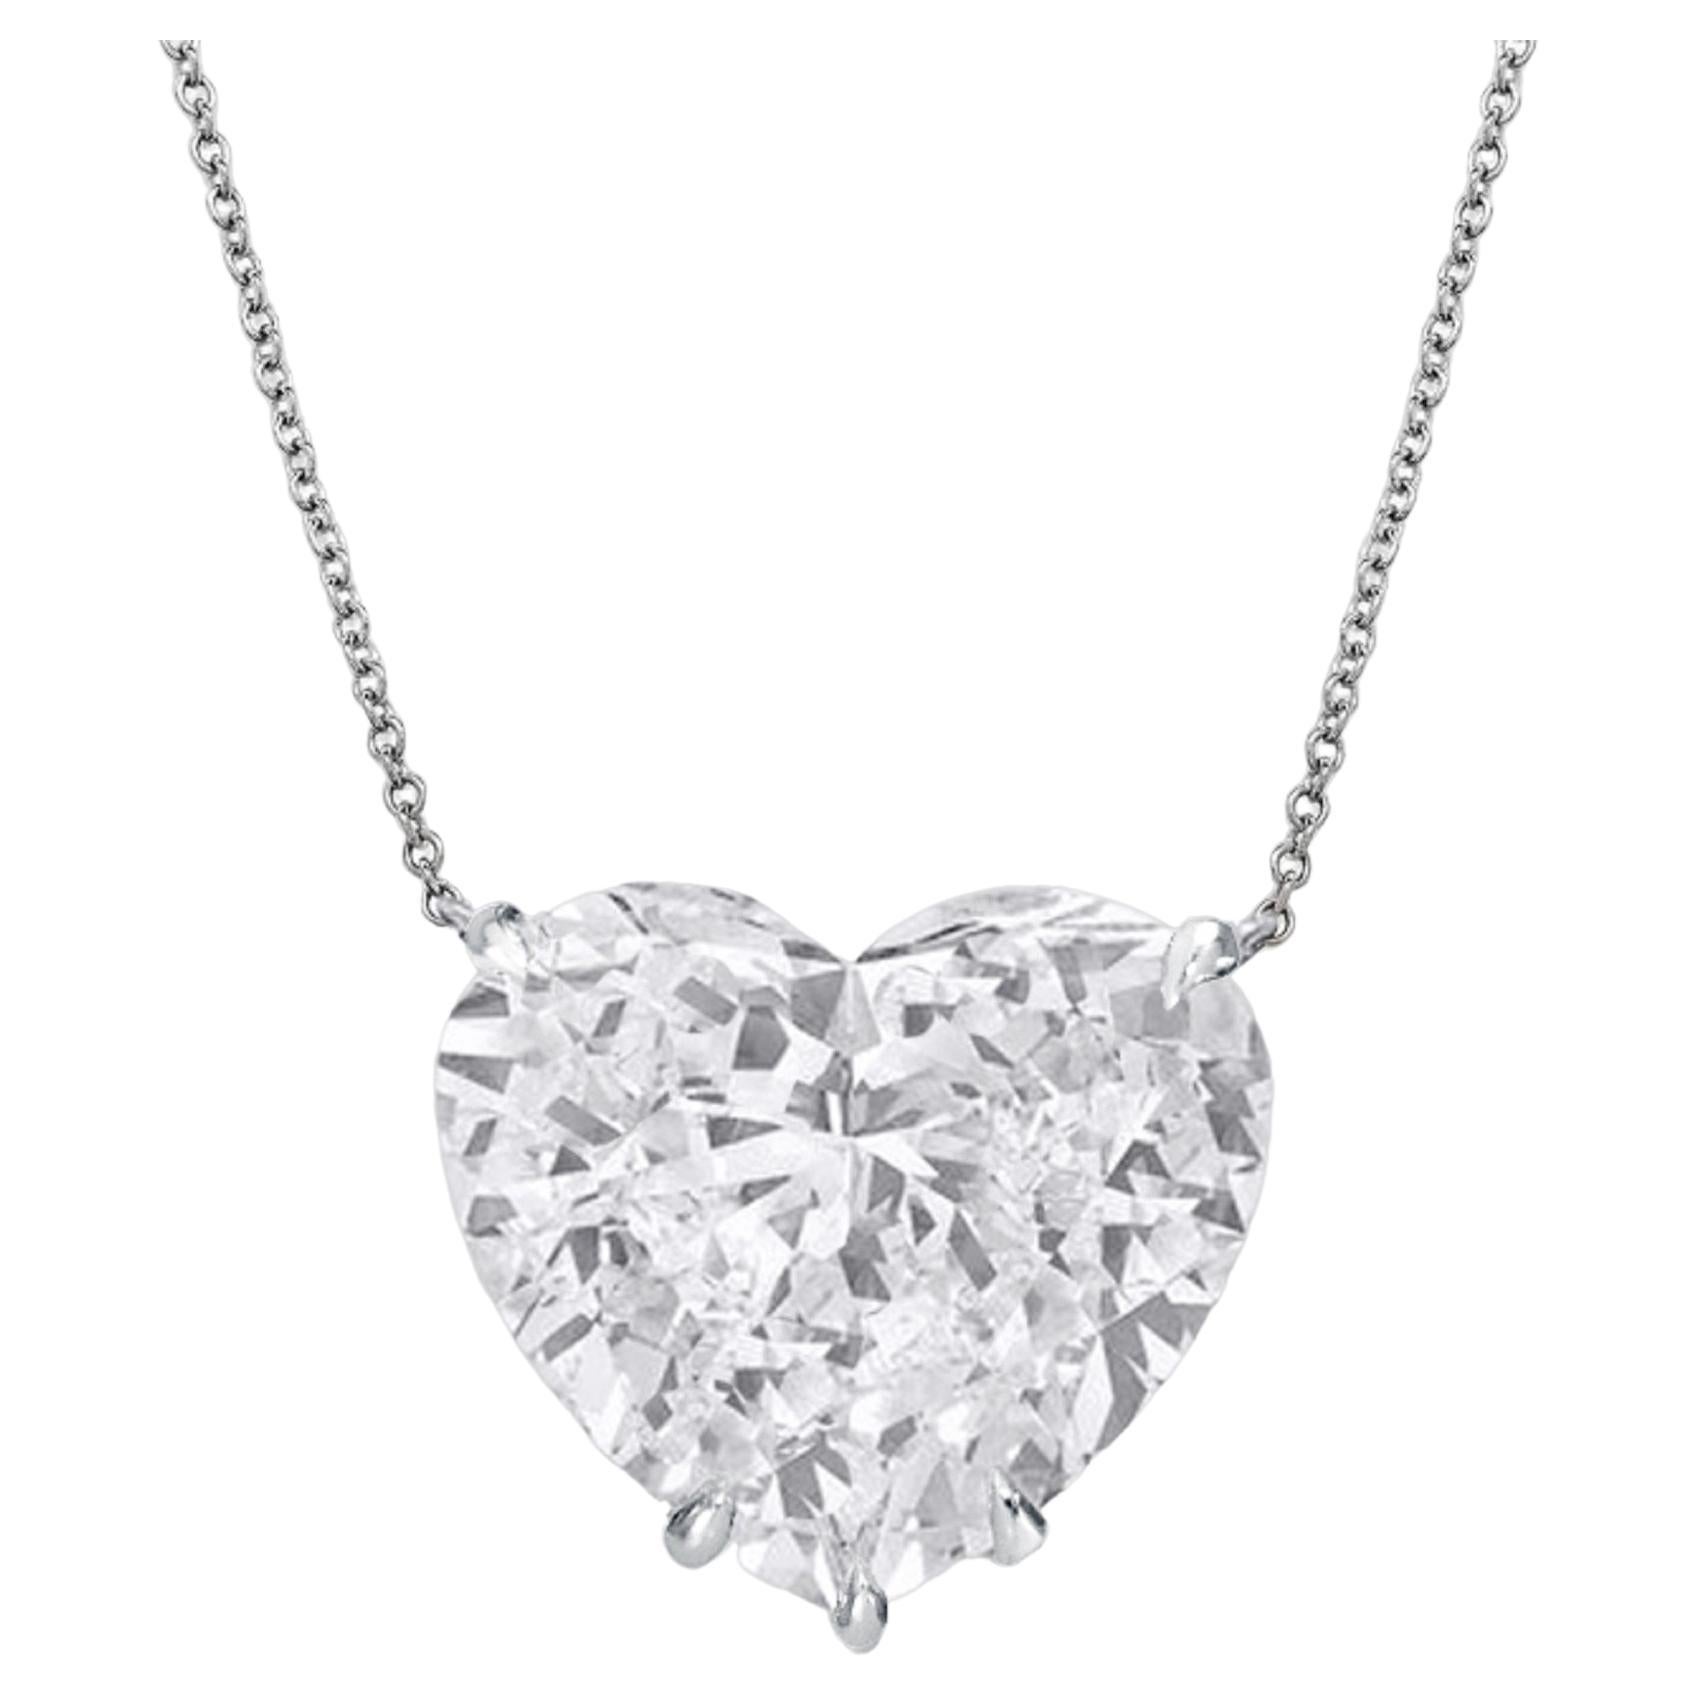 GIA Certified 4 Carat Heart Shape Diamond Platinum Necklace
F COLOR
IF
INVESTMENT GRADE